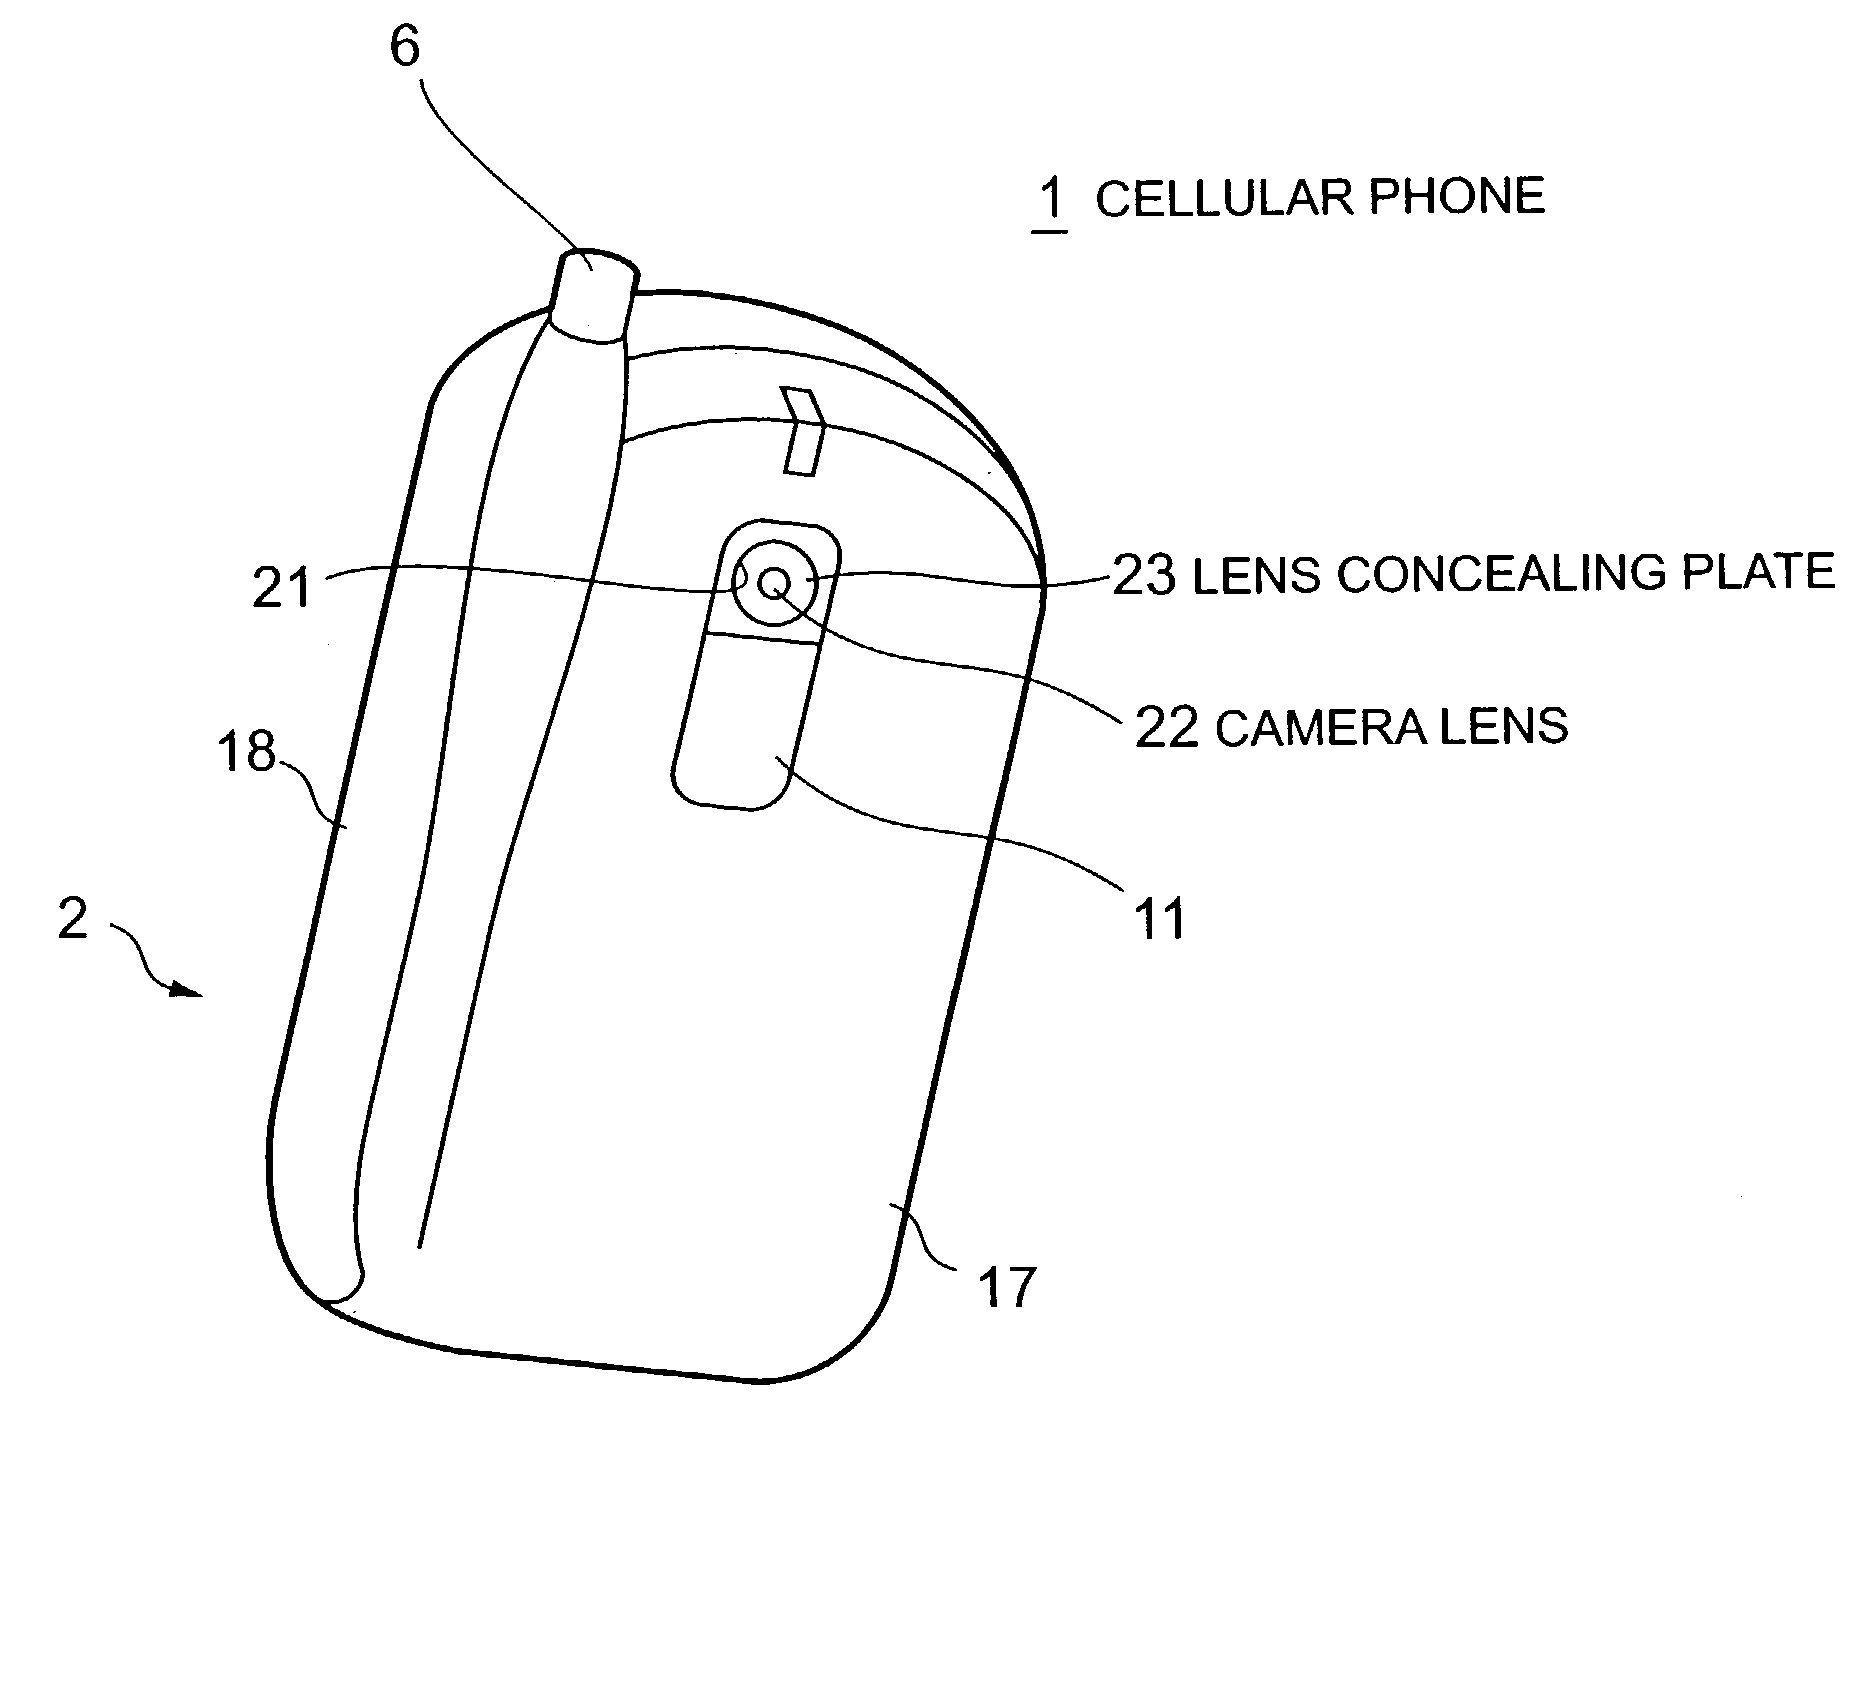 Portable electronic equipment having a photographic function and a concealable lens